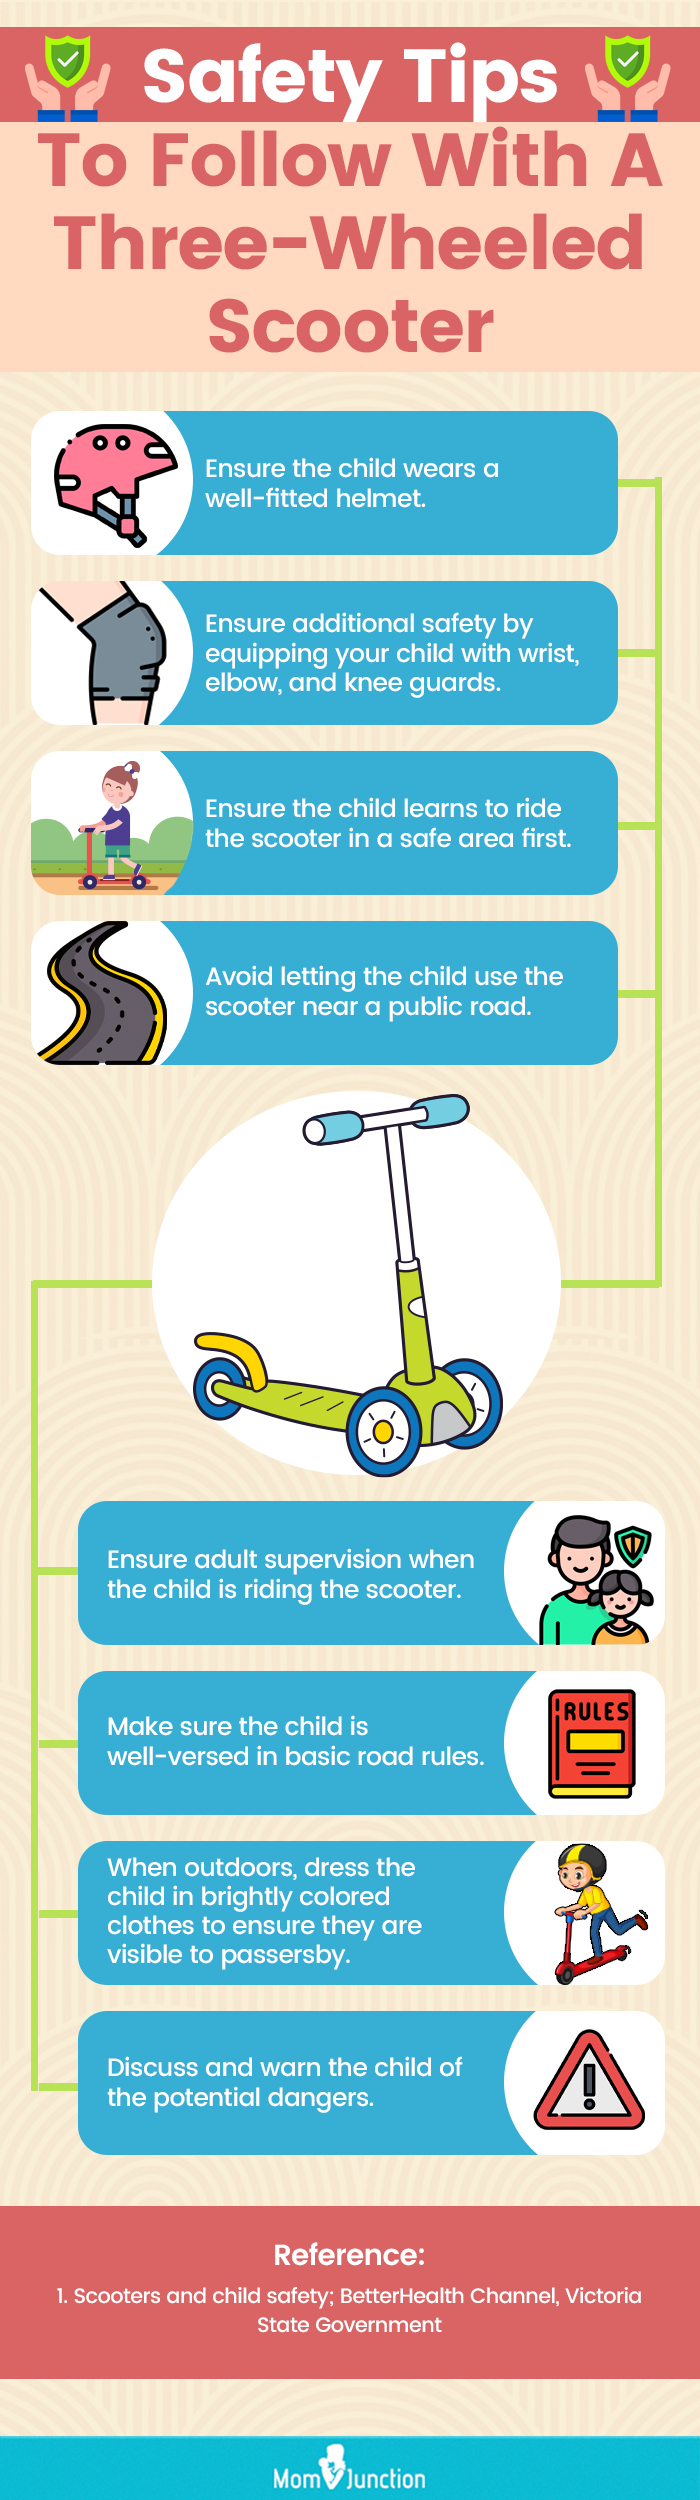 Safety Tips To Follow With A Three-Wheeled Scooter